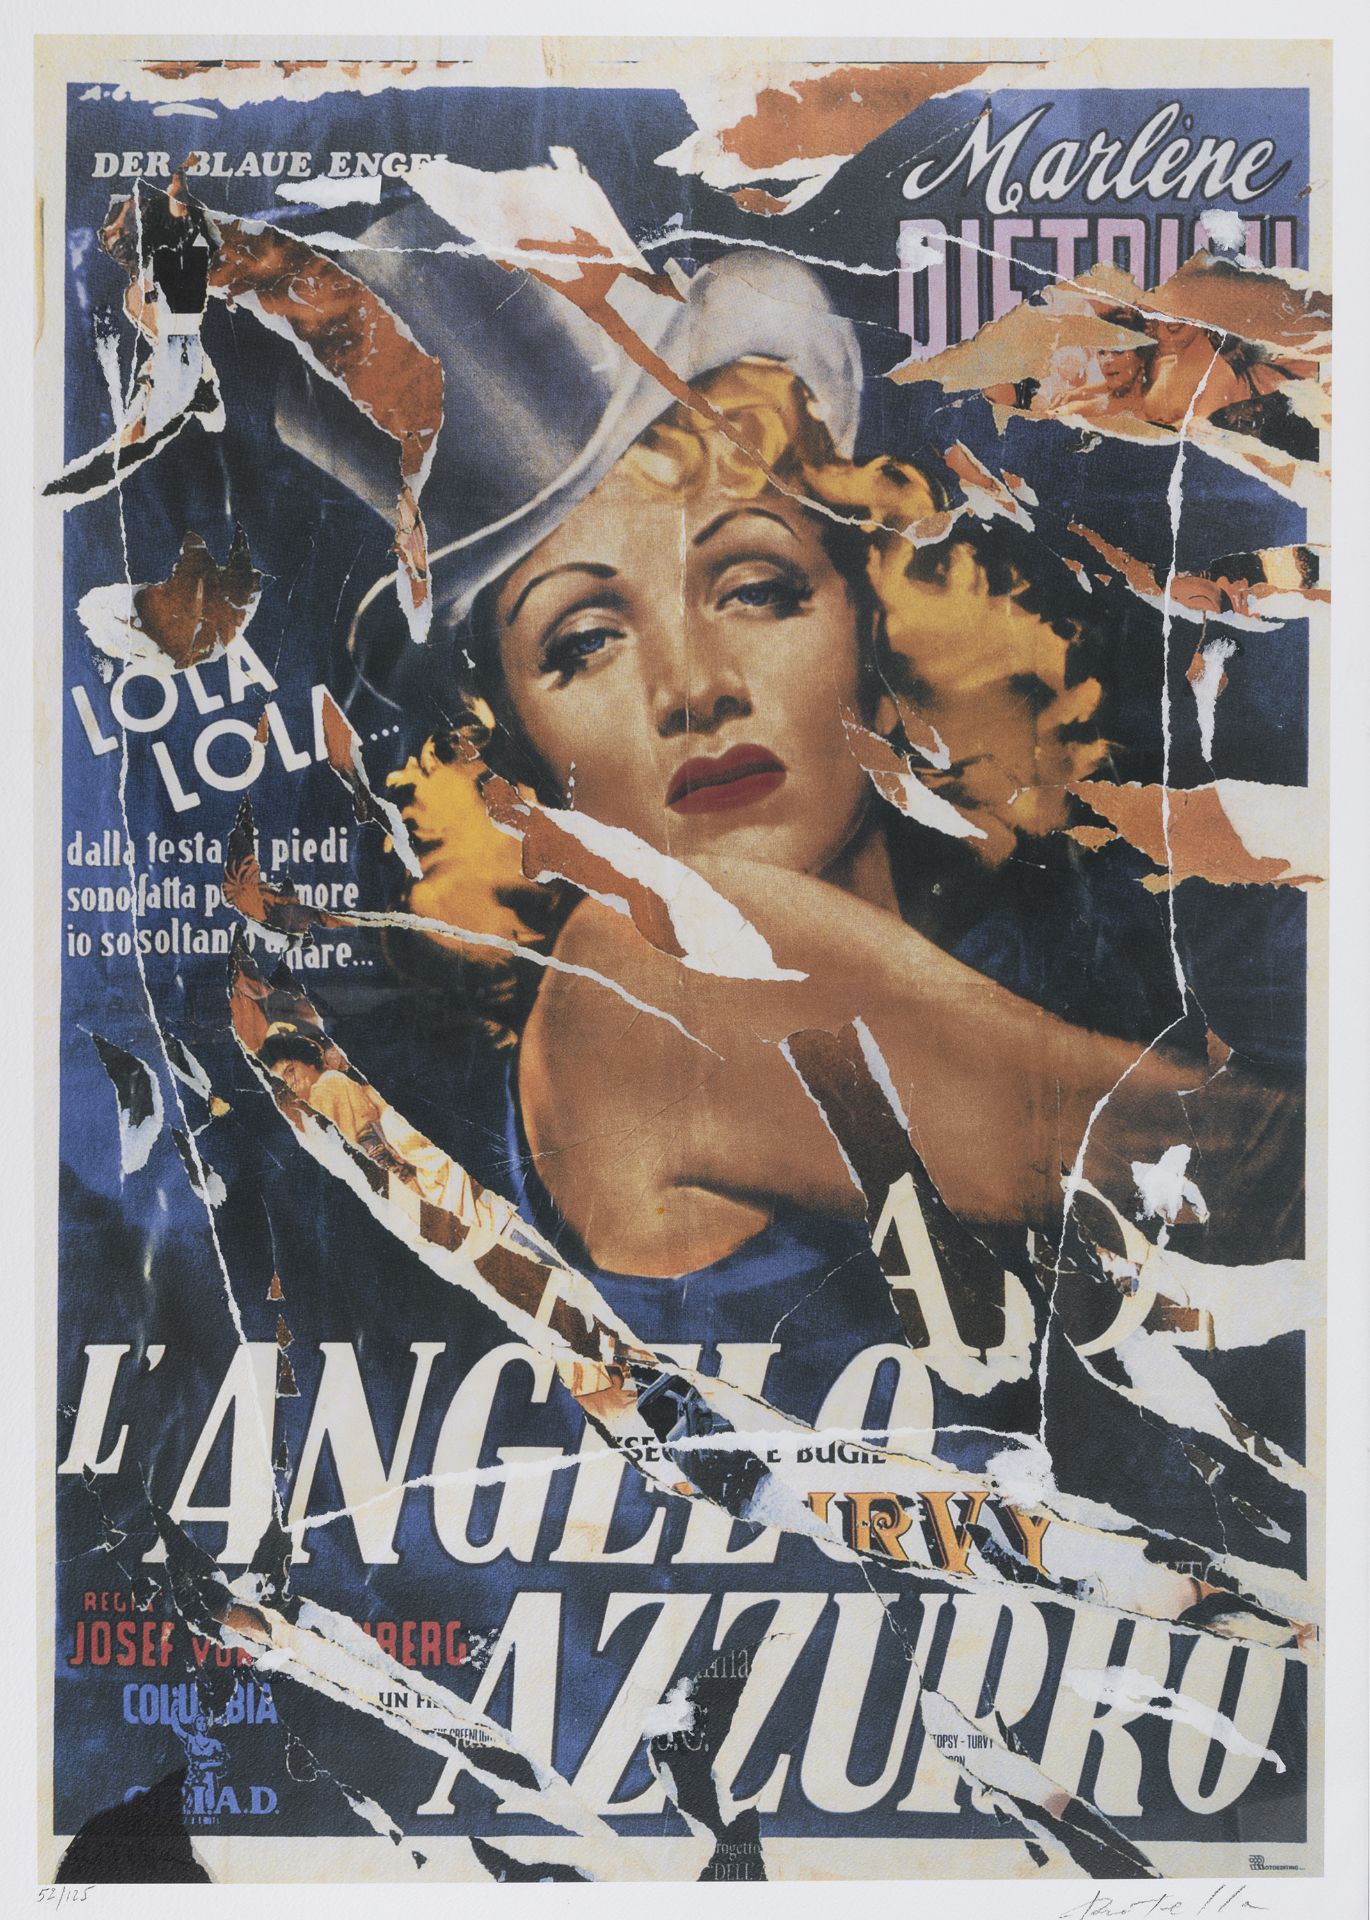 LITHOGRAPH BY MIMMO ROTELLA